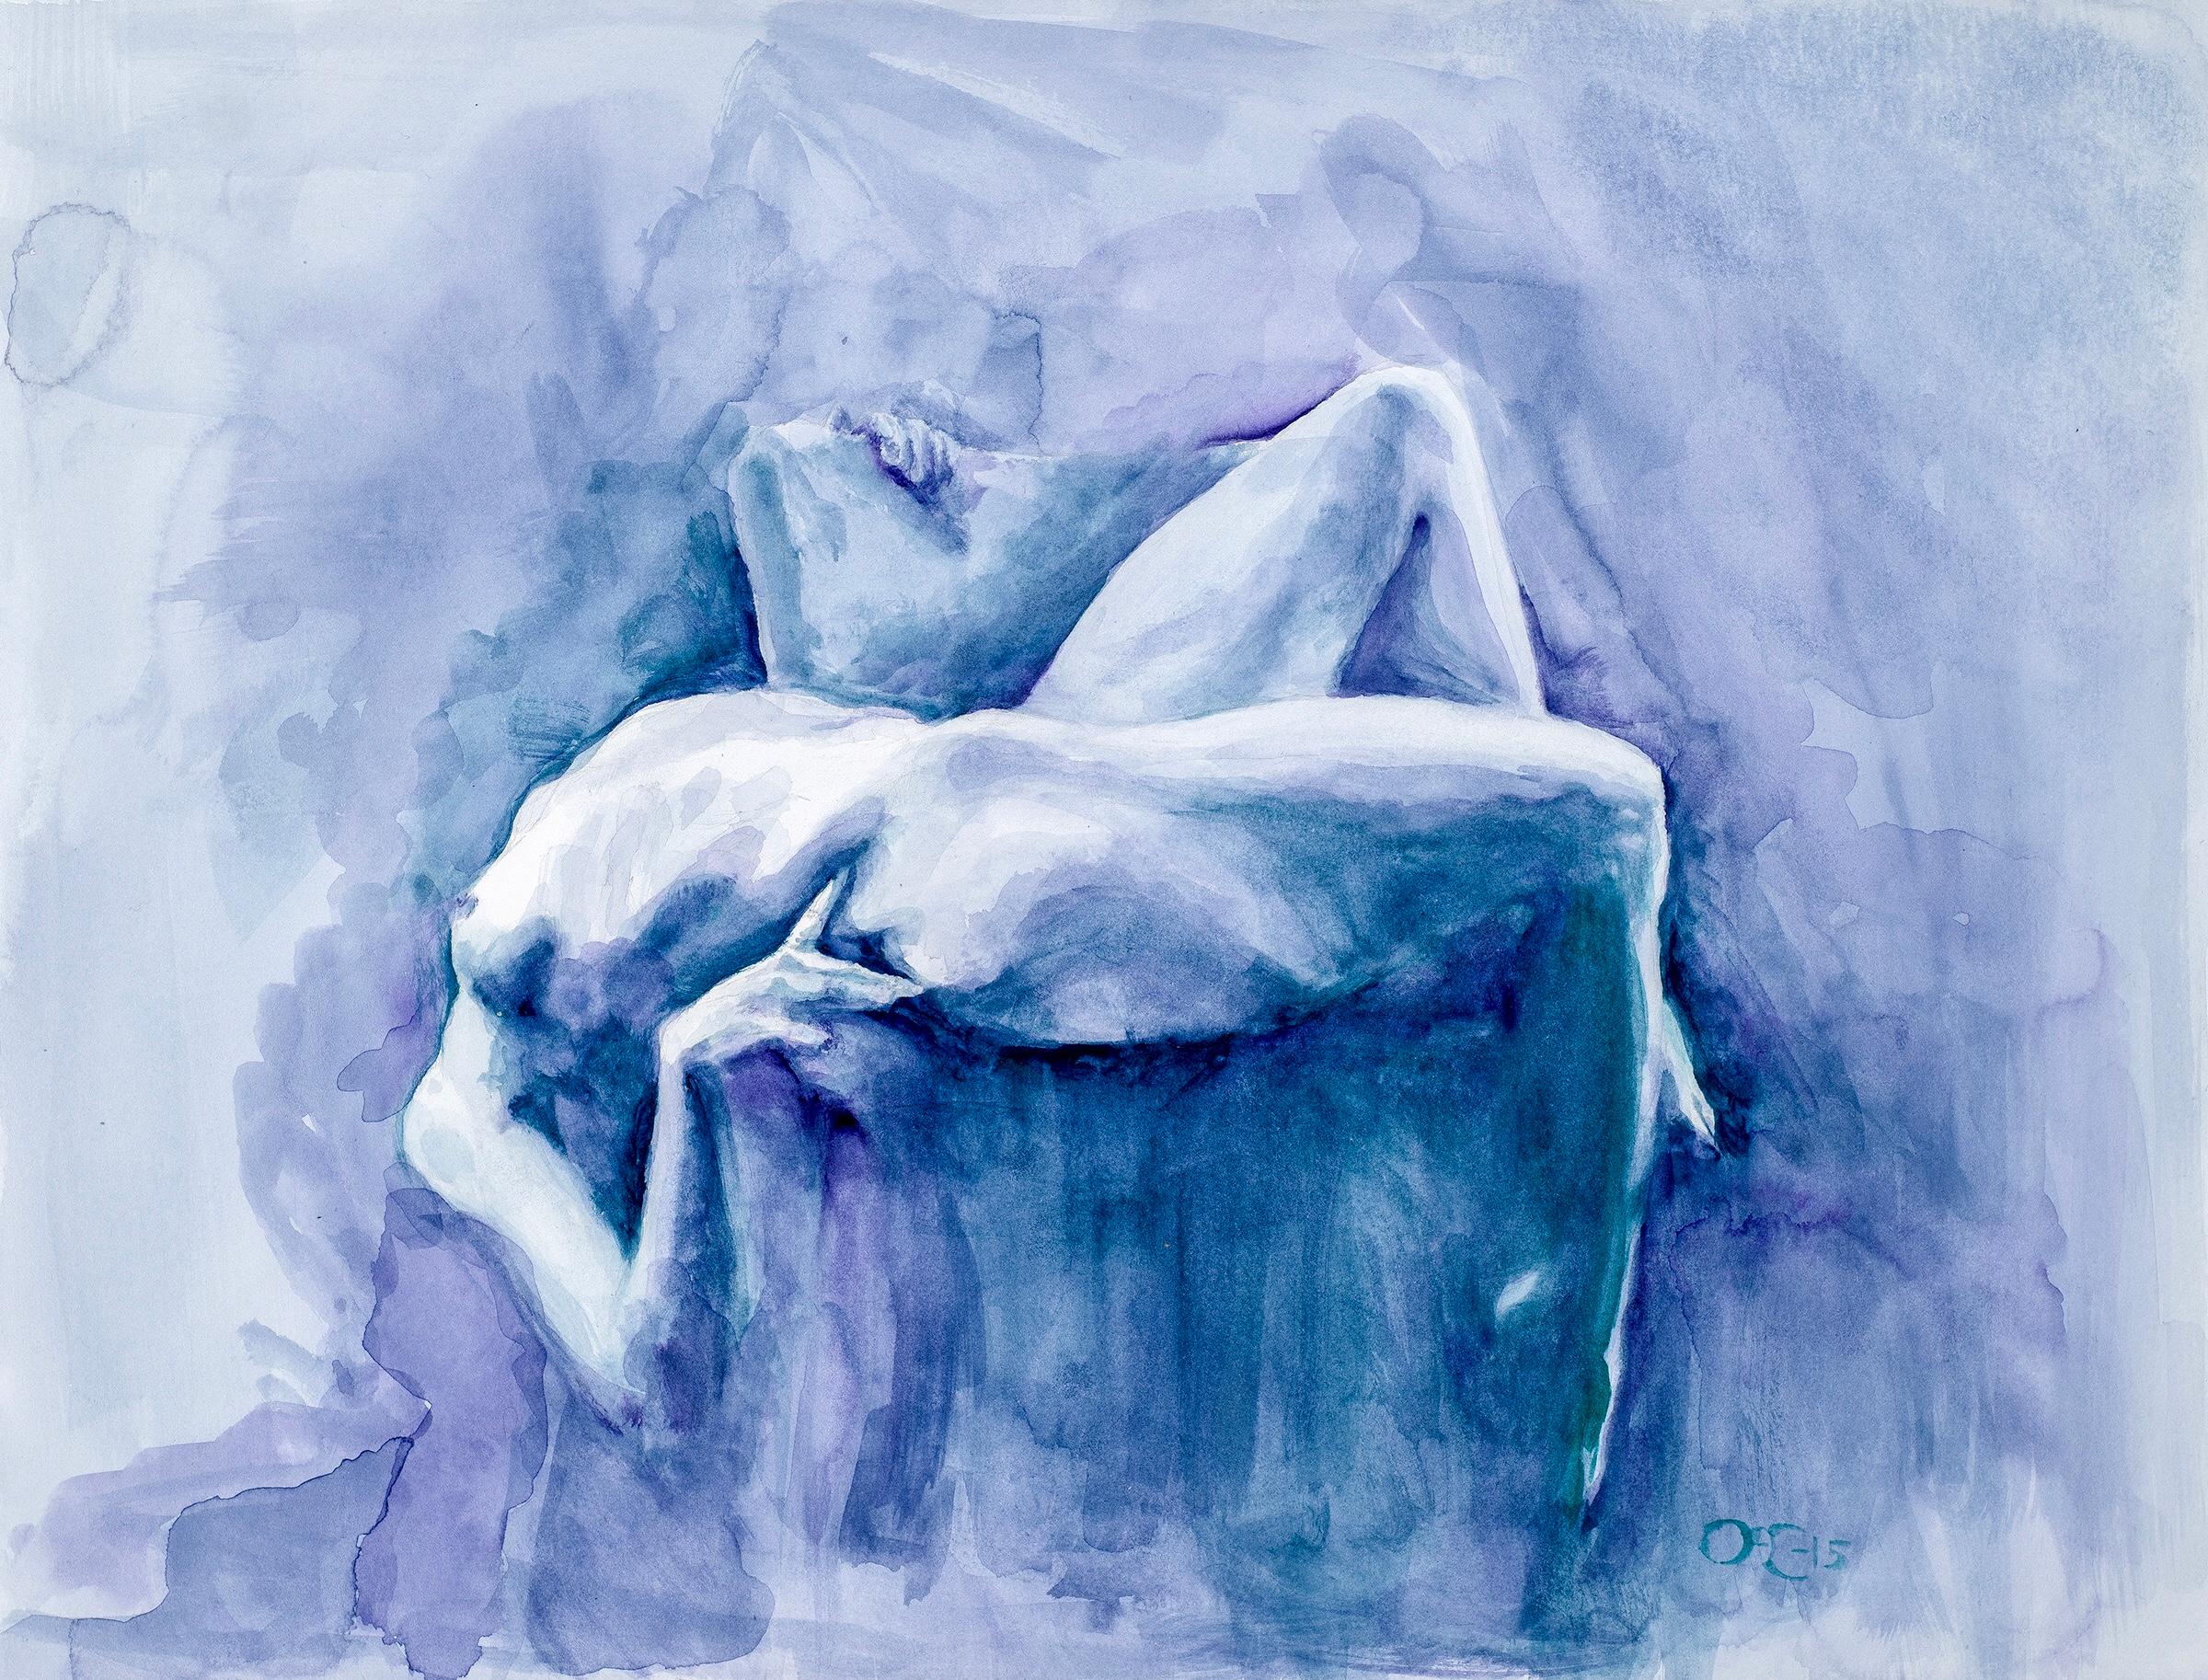 Orielle Caldwell Nude Painting - 'Rhapsody in Blue' Watercolor Painting By Orielle - Female Nudes Art